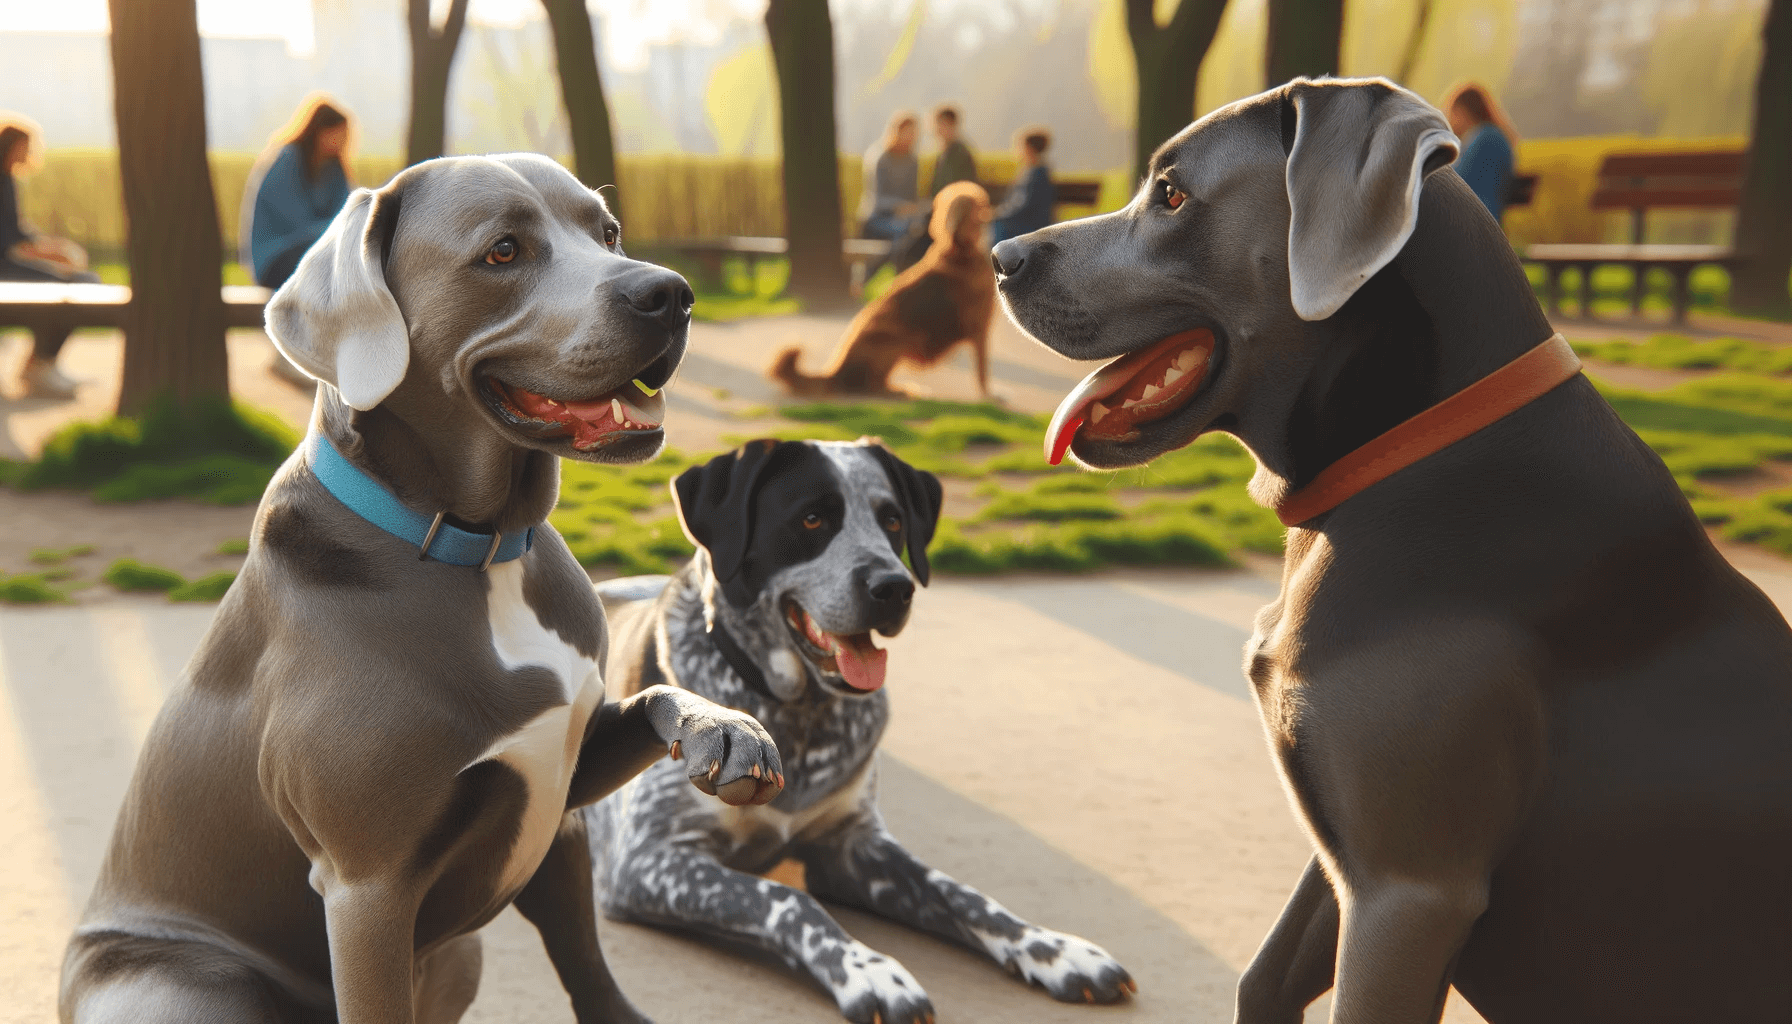 Greyador_s_friendly_demeanor_making_friends_with_other_dogs_depicted_in_a_playful_and_social_scene_at_the_park